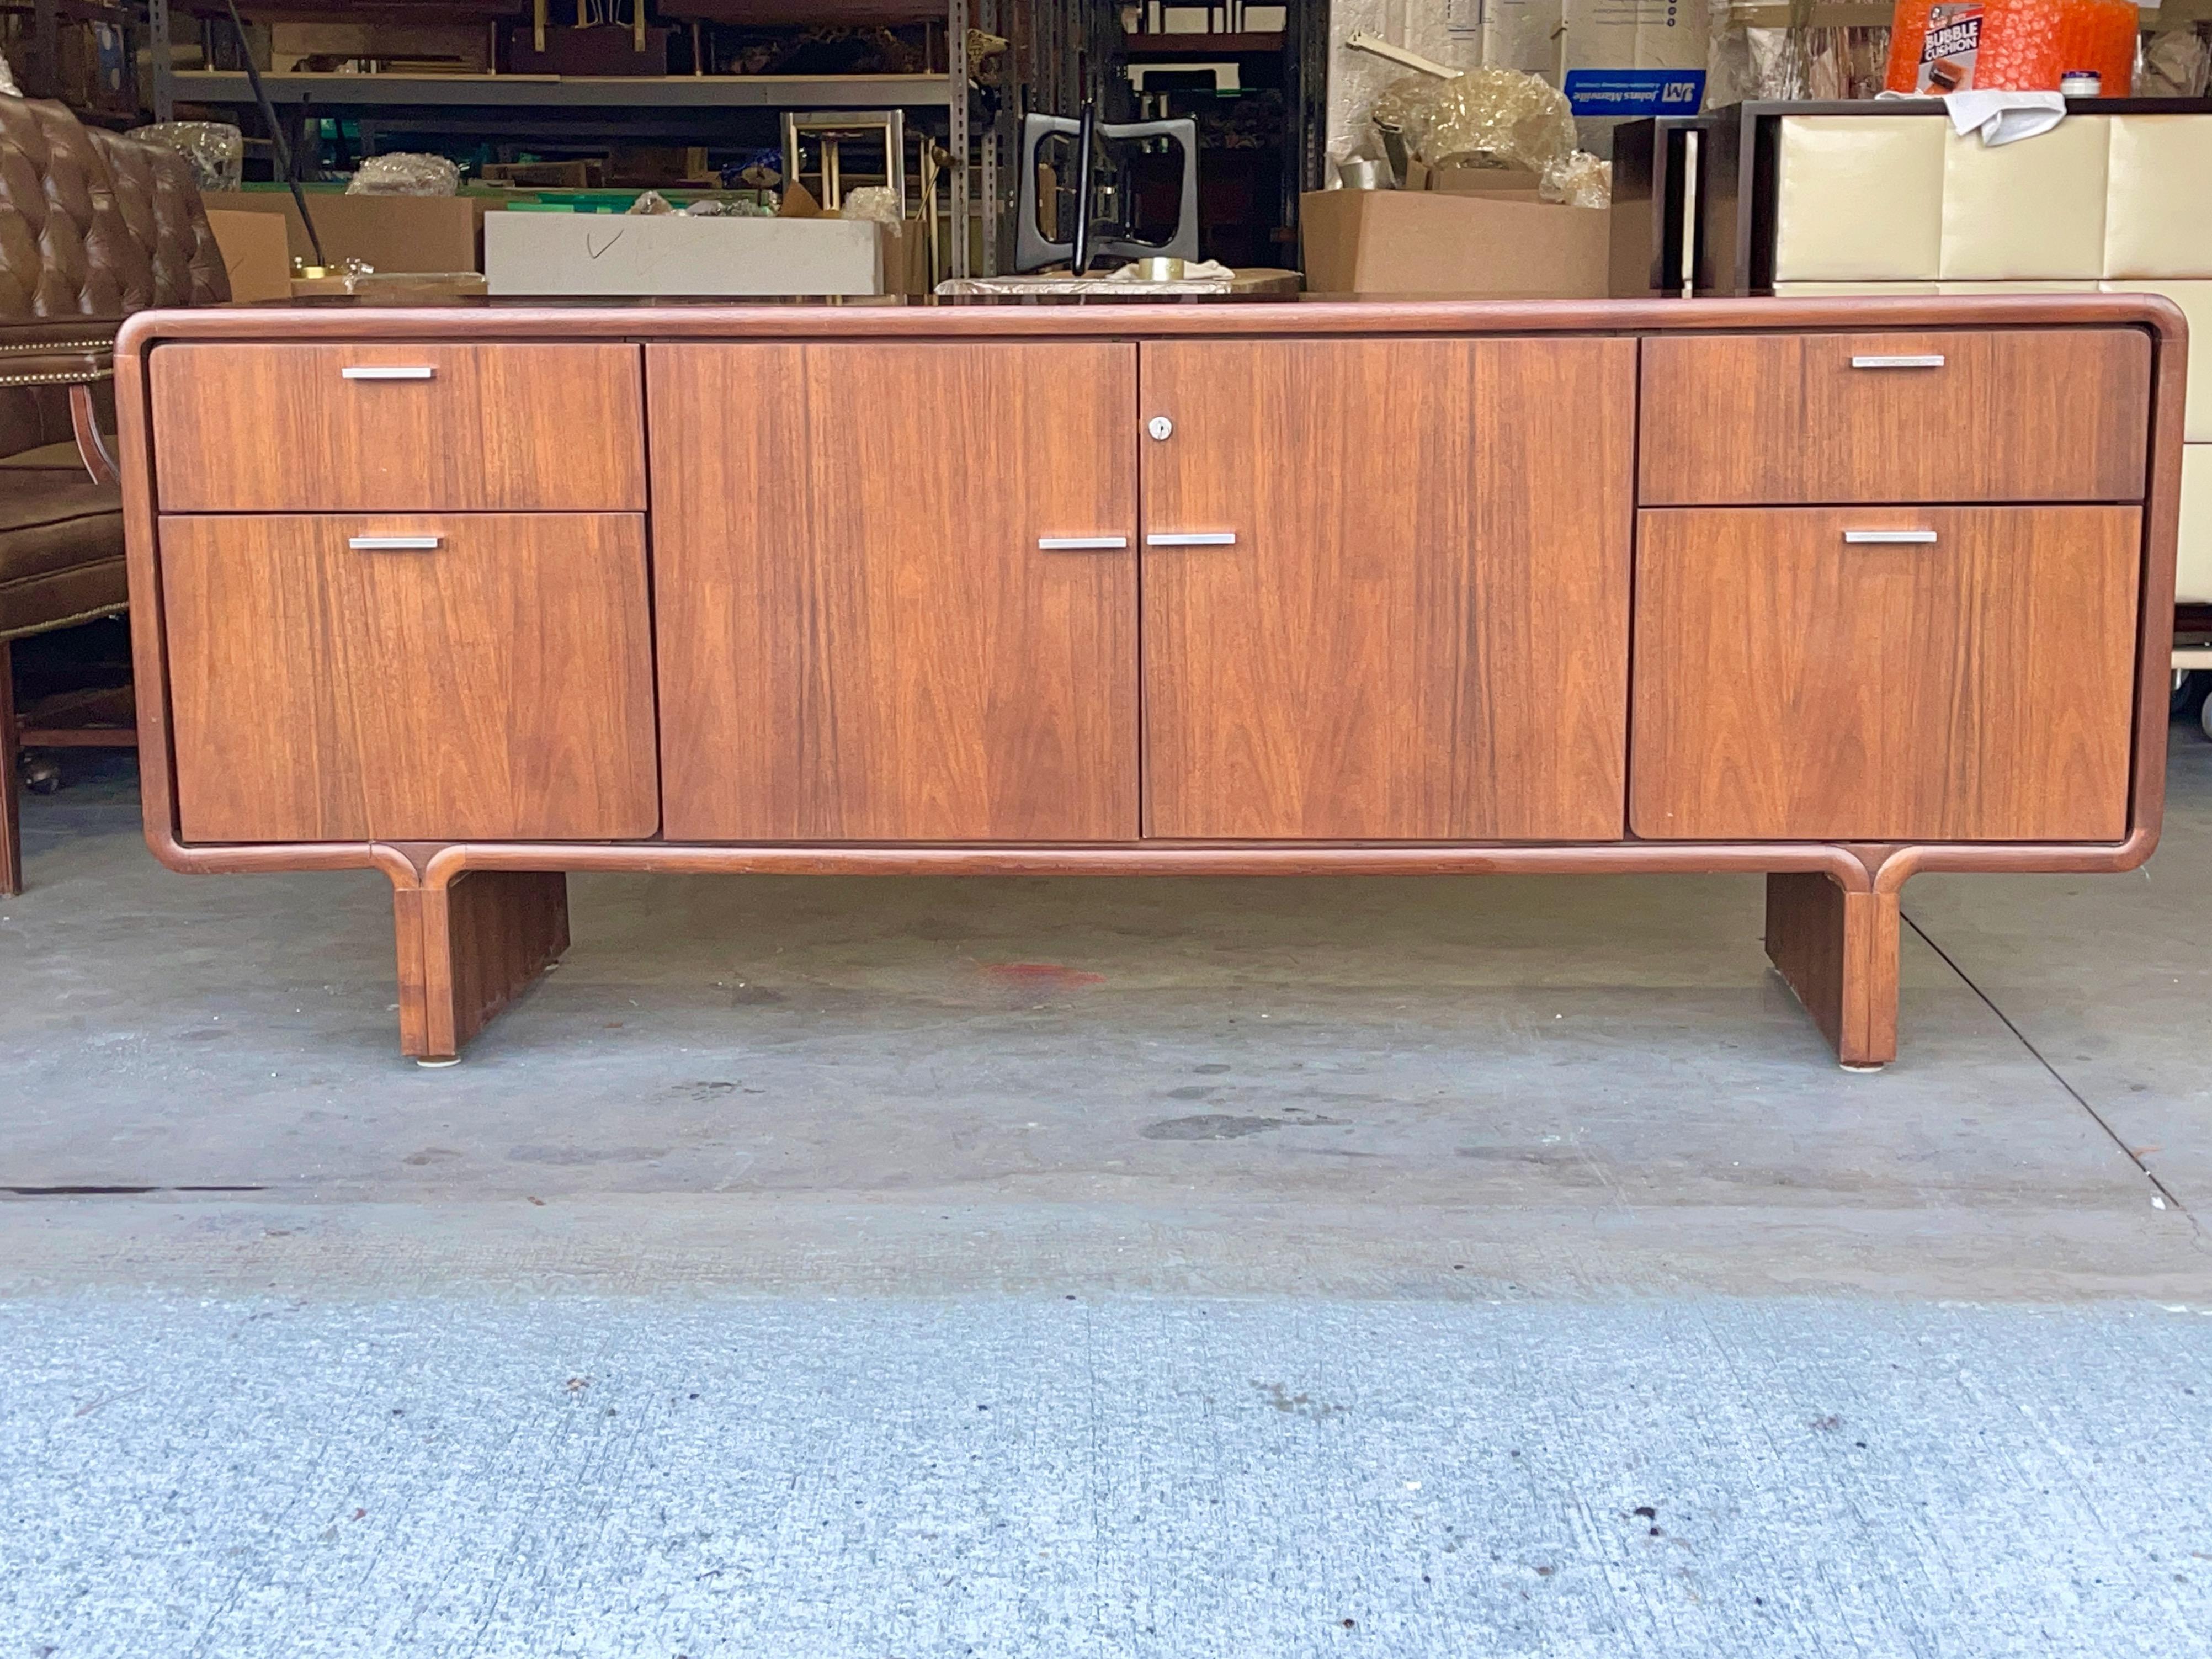 Montreal modern walnut credenza with space age styling exemplified in the top and bottom waterfall edges of the long slender case appearing to float on two eight inch legs.
Finished on backside so can float in the room and be viewed from all